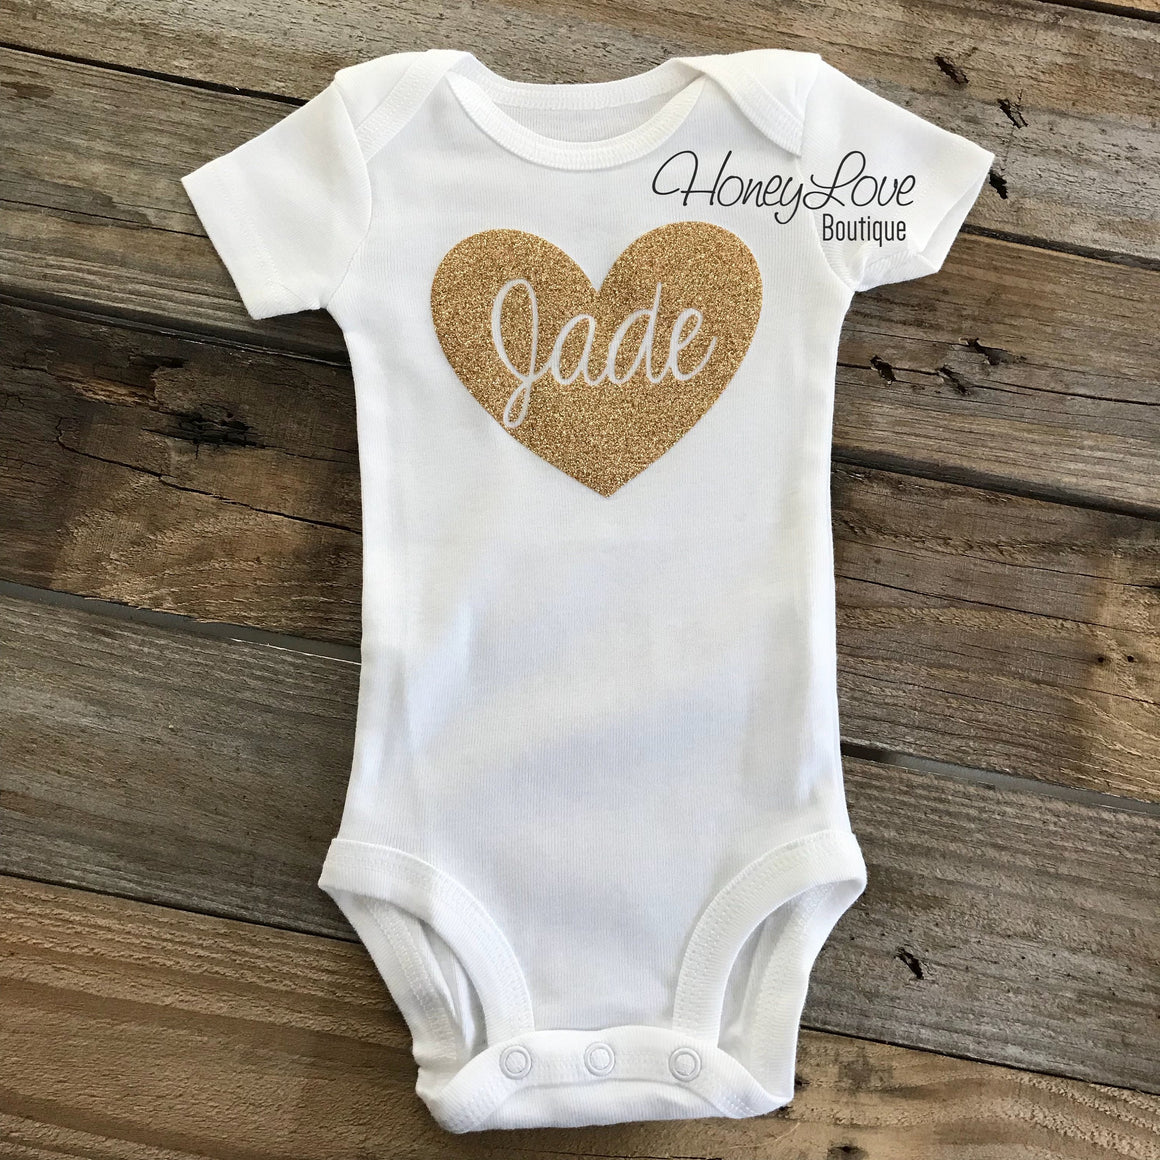 PERSONALIZED Name inside Heart - Vintage Pink and Gold/Silver/Rose Gold glitter - HoneyLoveBoutique